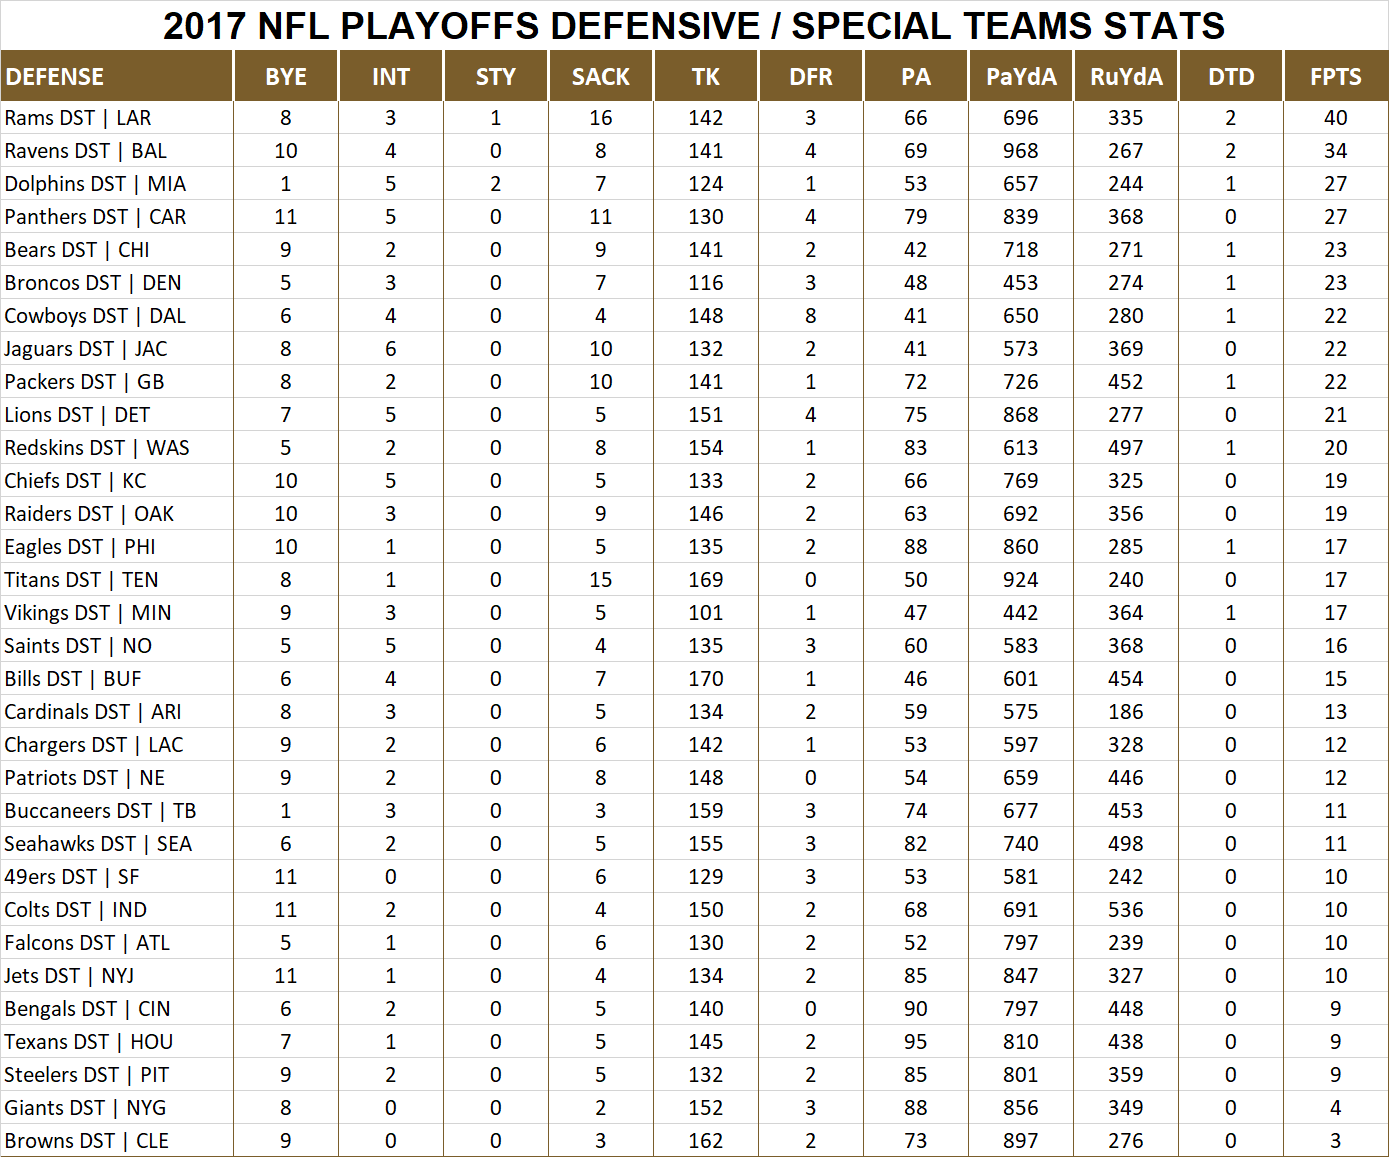 2017 National Football League Pool Playoff Player Defensive Stats